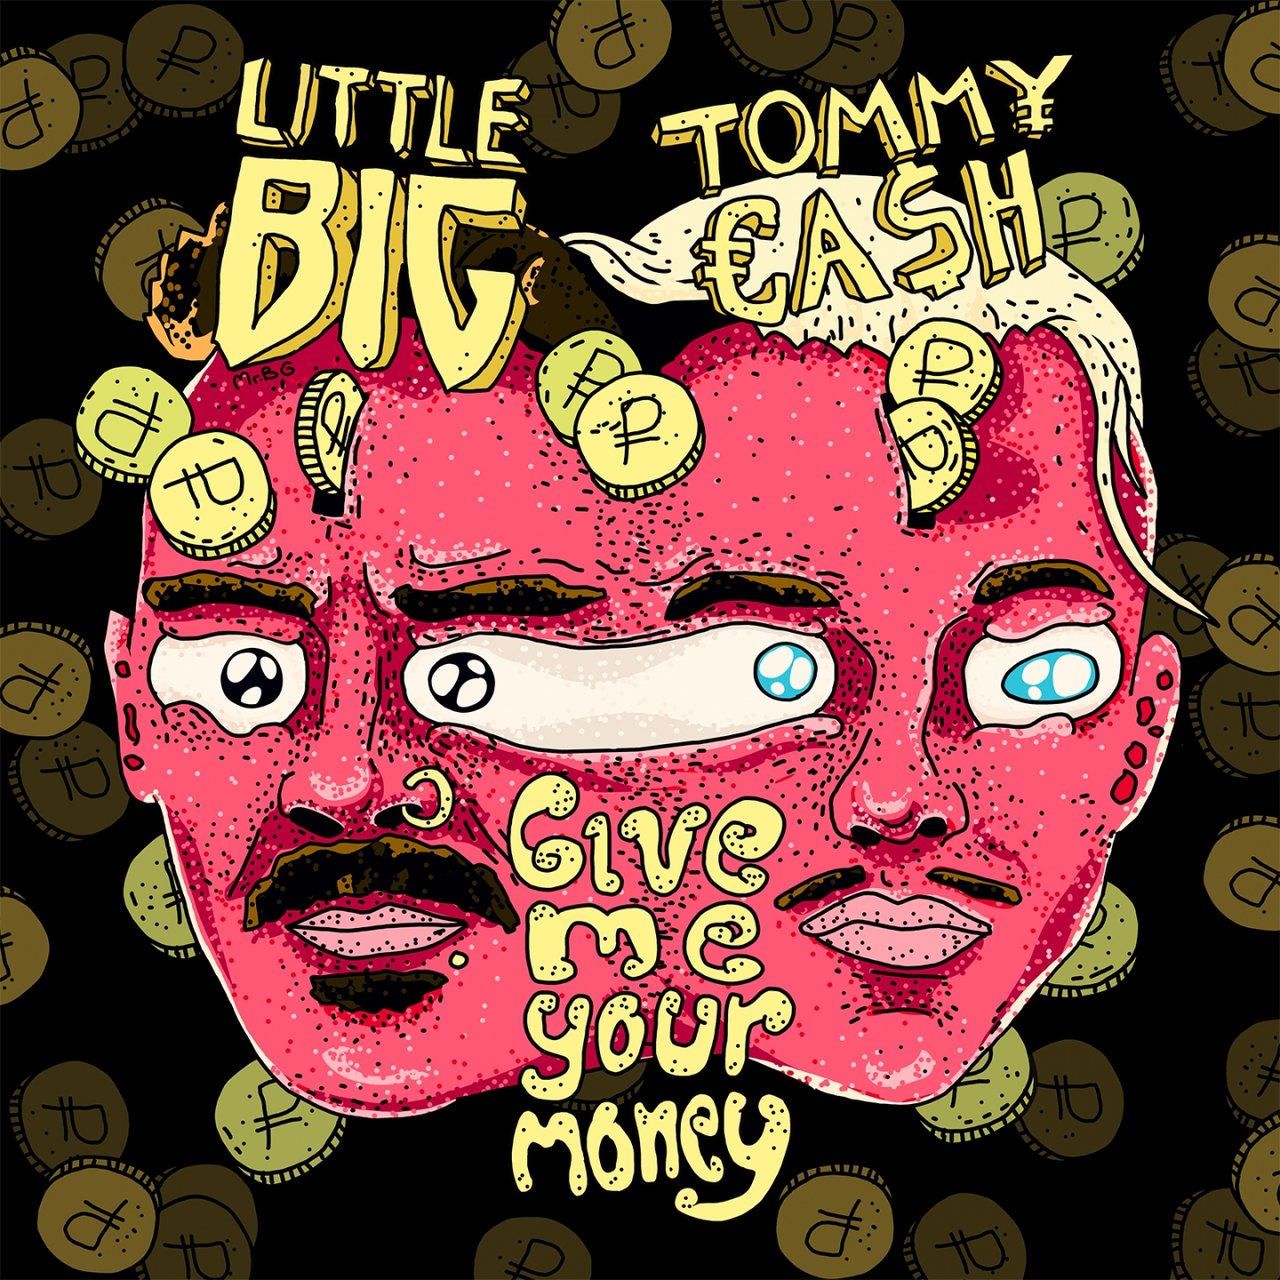 Little Big featuring Tommy Cash — Give Me Your Money cover artwork